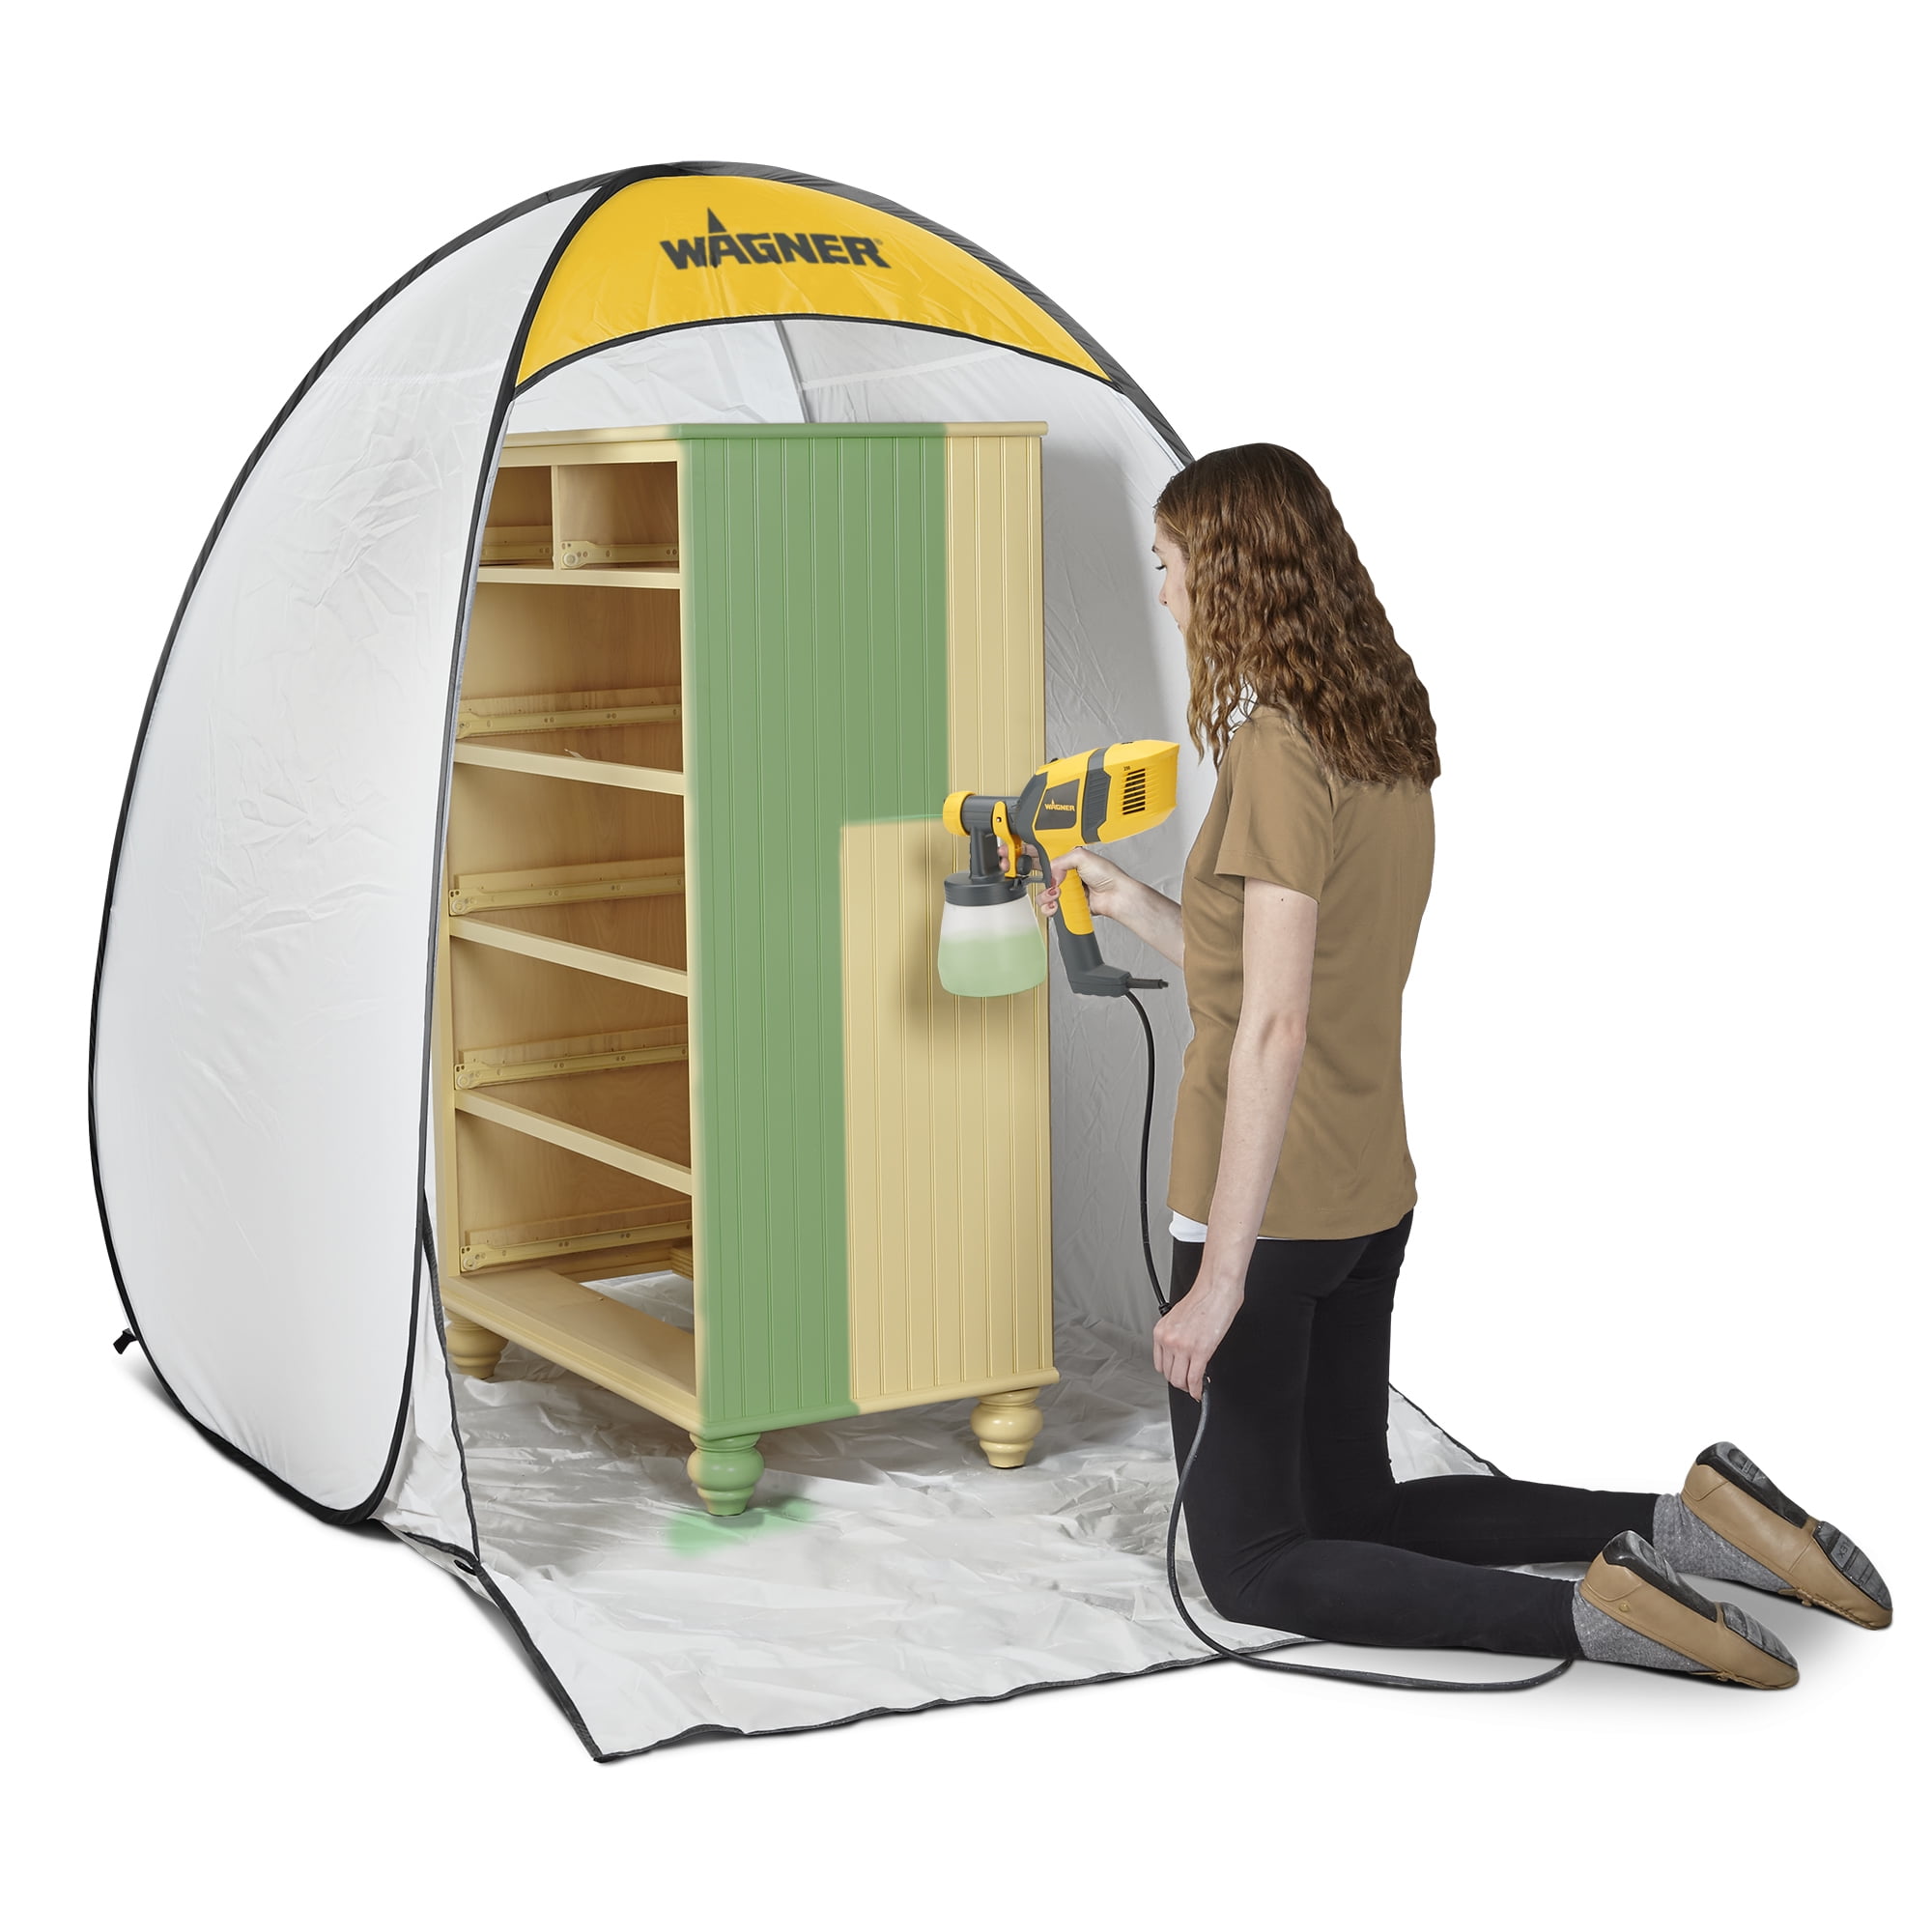 Wagner SprayTech Wagner Studio Spray Tent with Built-In Floor, portable spray  paint booth, spray paint